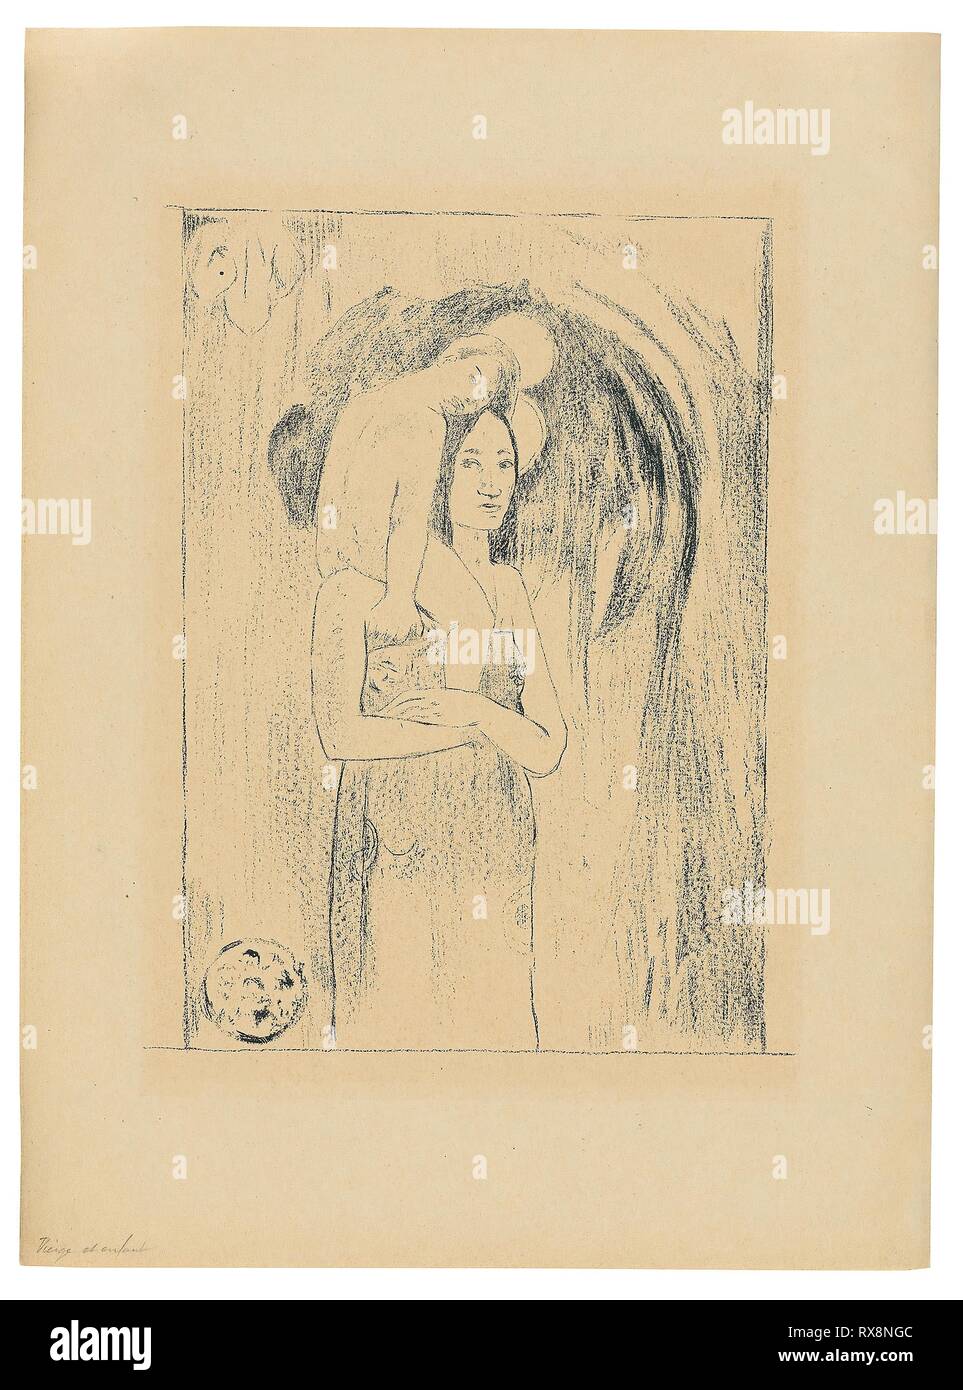 Ia orana Maria (Hail Mary). Paul Gauguin; French, 1848-1903. Date: 1894-1895. Dimensions: 257 × 186 mm (image); 381 × 281 mm (sheet). Transfer zincograph on coarse-grained transfer paper, in dark-blue ink on cream wove paper (an imitation Japanese vellum). Origin: France. Museum: The Chicago Art Institute. Stock Photo